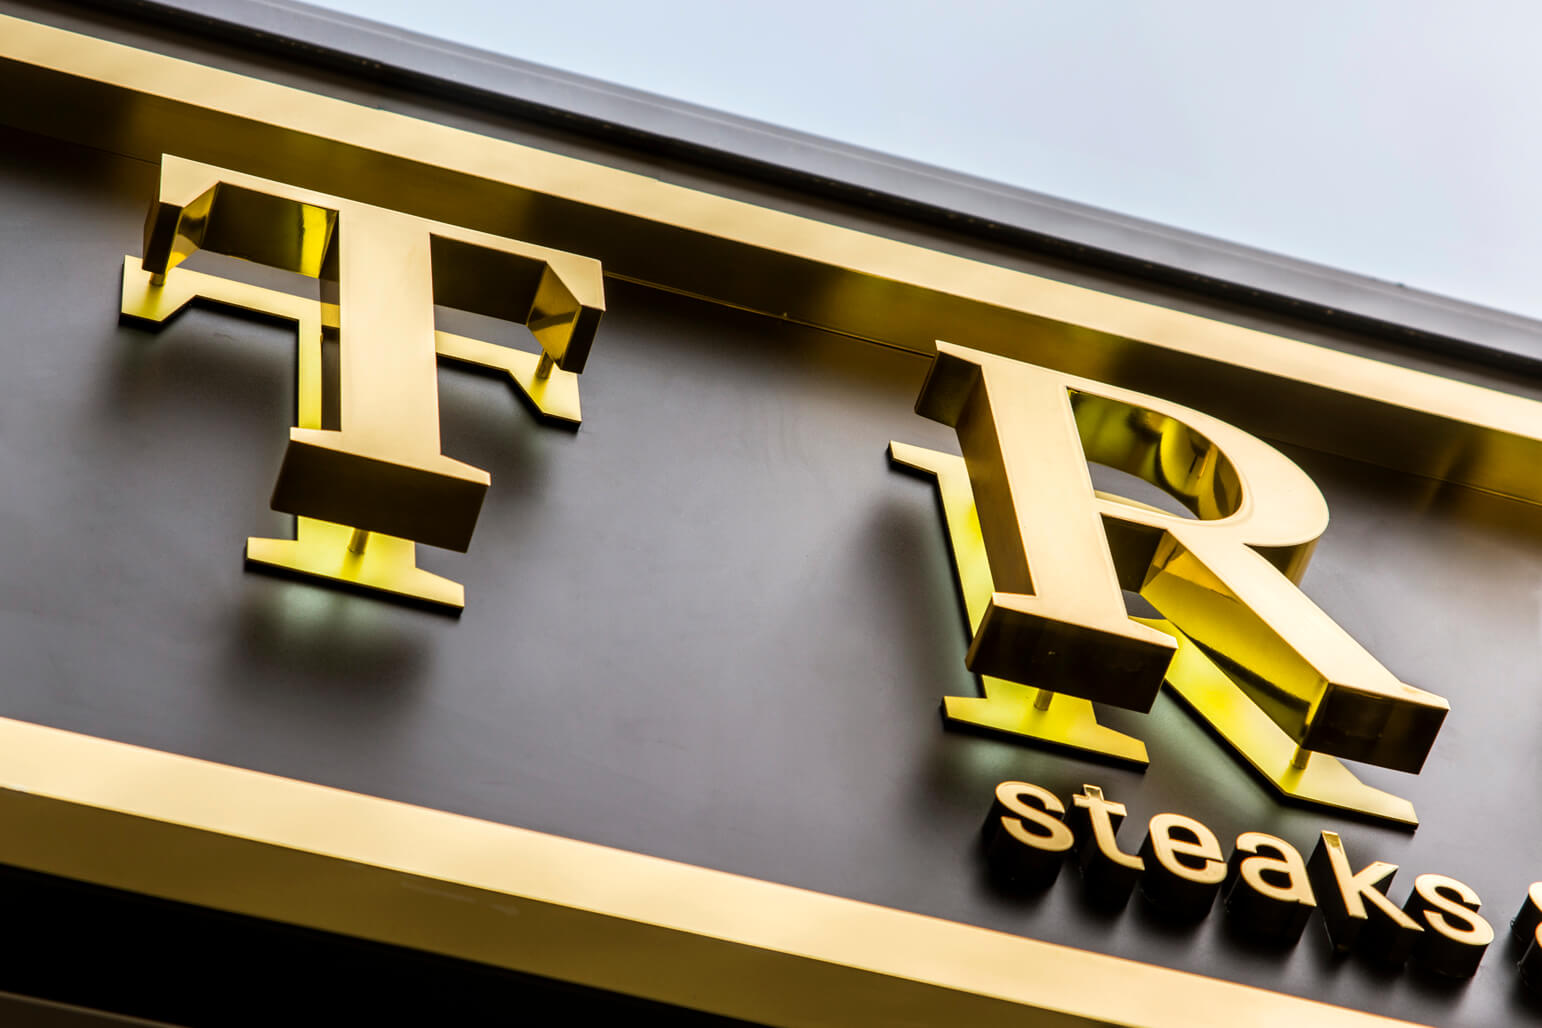 TRUE - True - external sign with golden letters made of stainless steel sheet